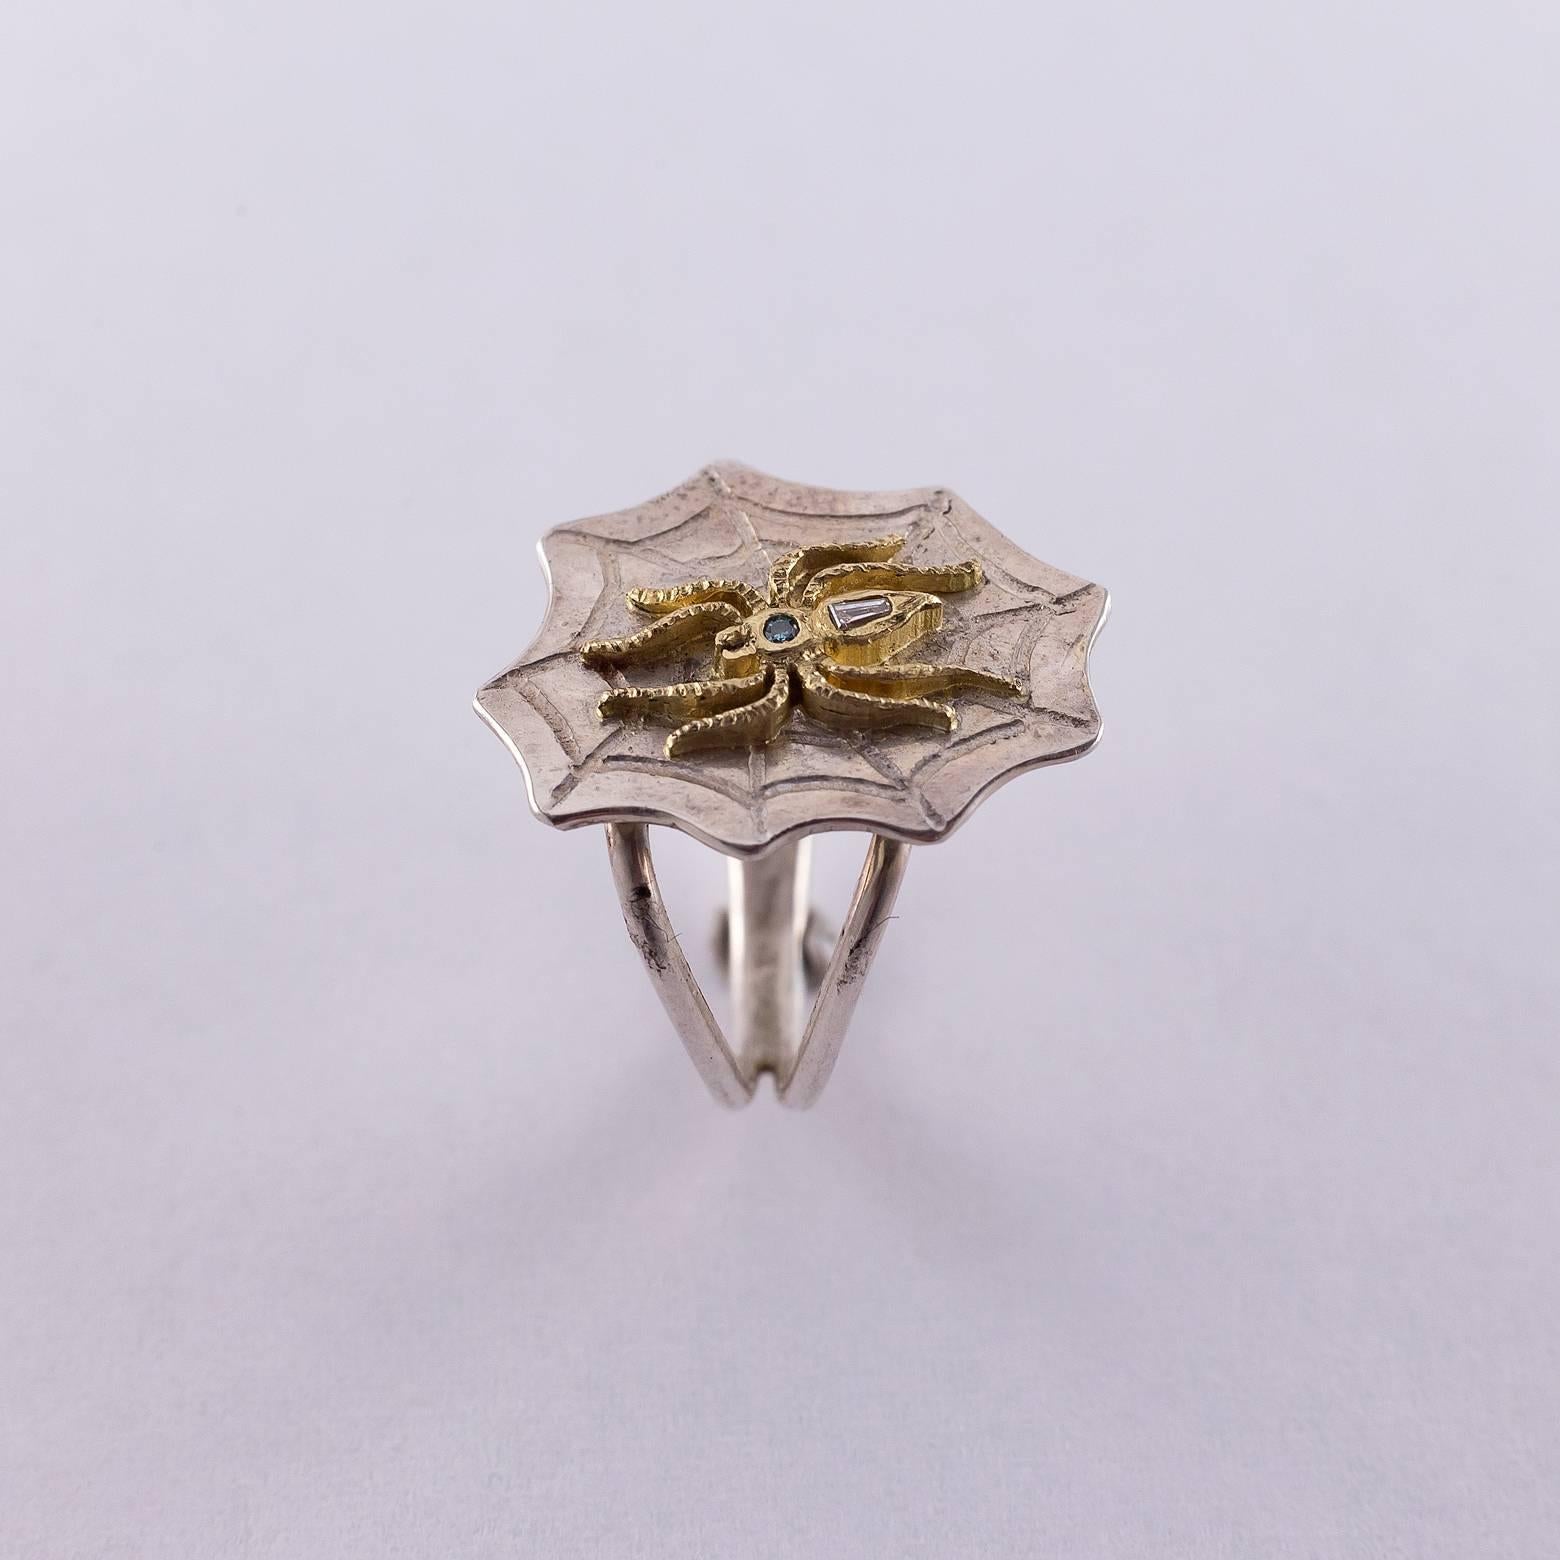 This bright and haunting piece comes with 1 blue diamond and 1 baguette diamond, 14K Yellow Gold and Sterling Silver. The intricacy on this spider is beautiful and the combination of diamonds gives it a unique glow. Size 6.75